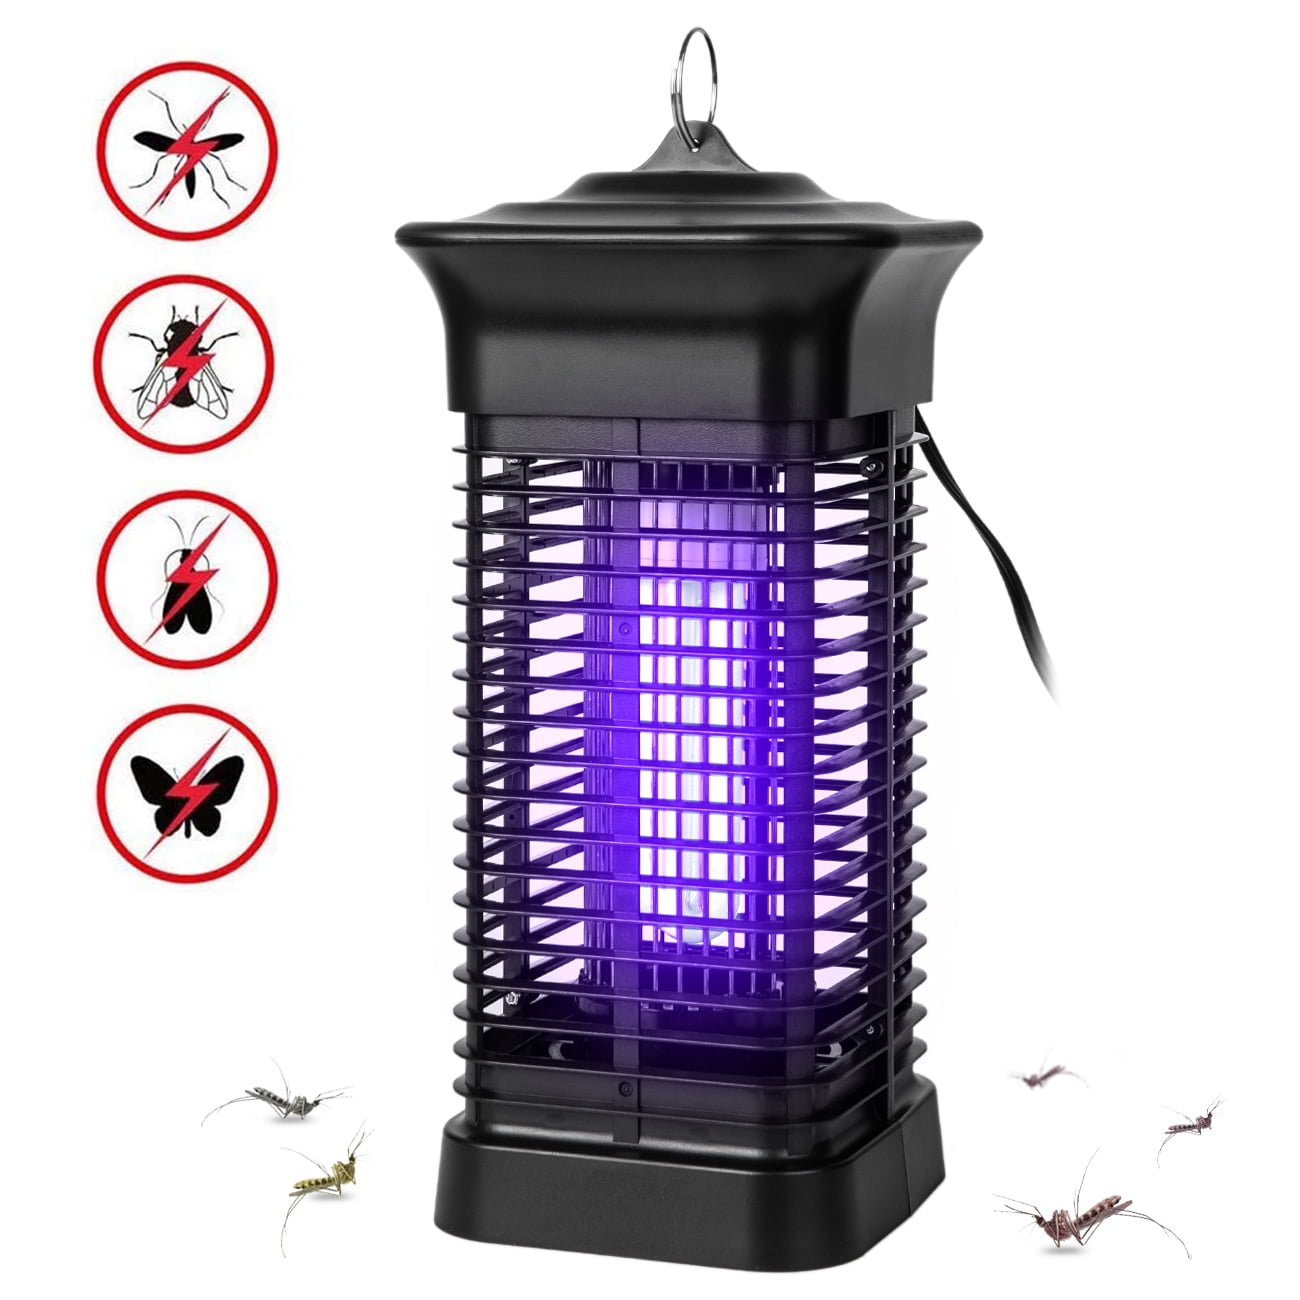 2020 UPGRADED - LINKPAL 15w Electric Bug Zapper Pest Repeller